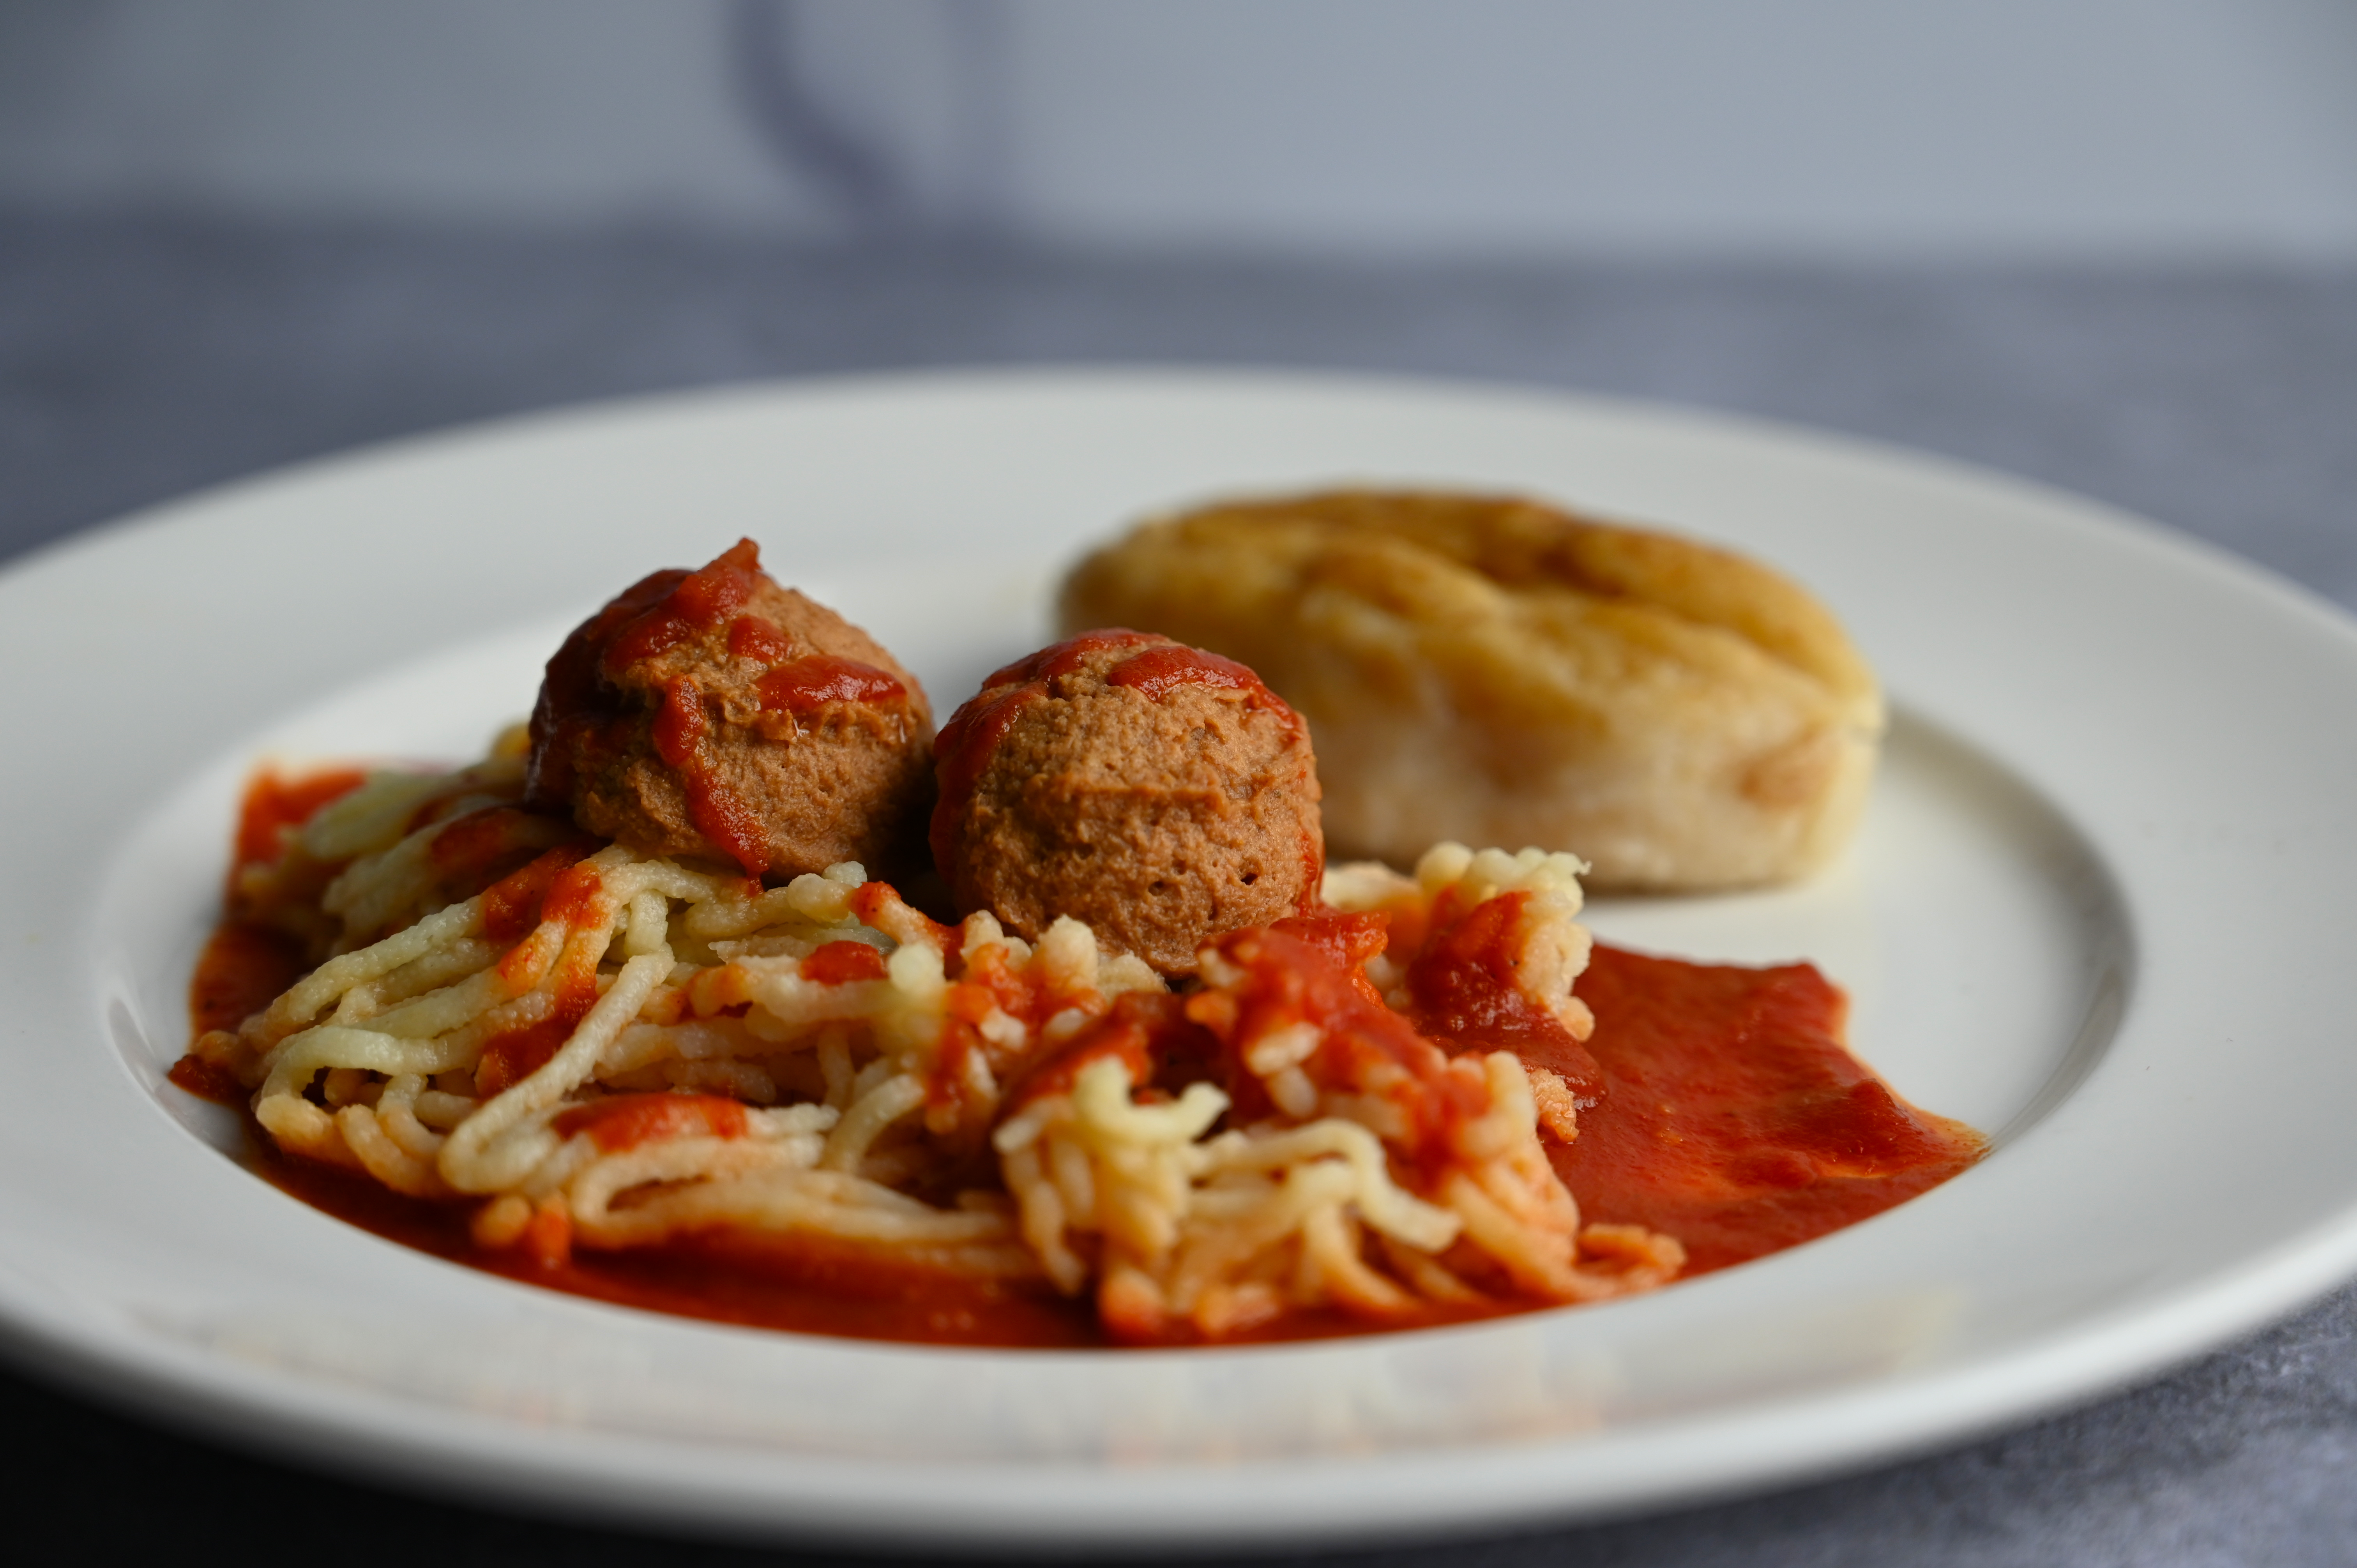 Spaghetti and Meatballs on a plate with red sauce and a bread roll. All of the food is puree